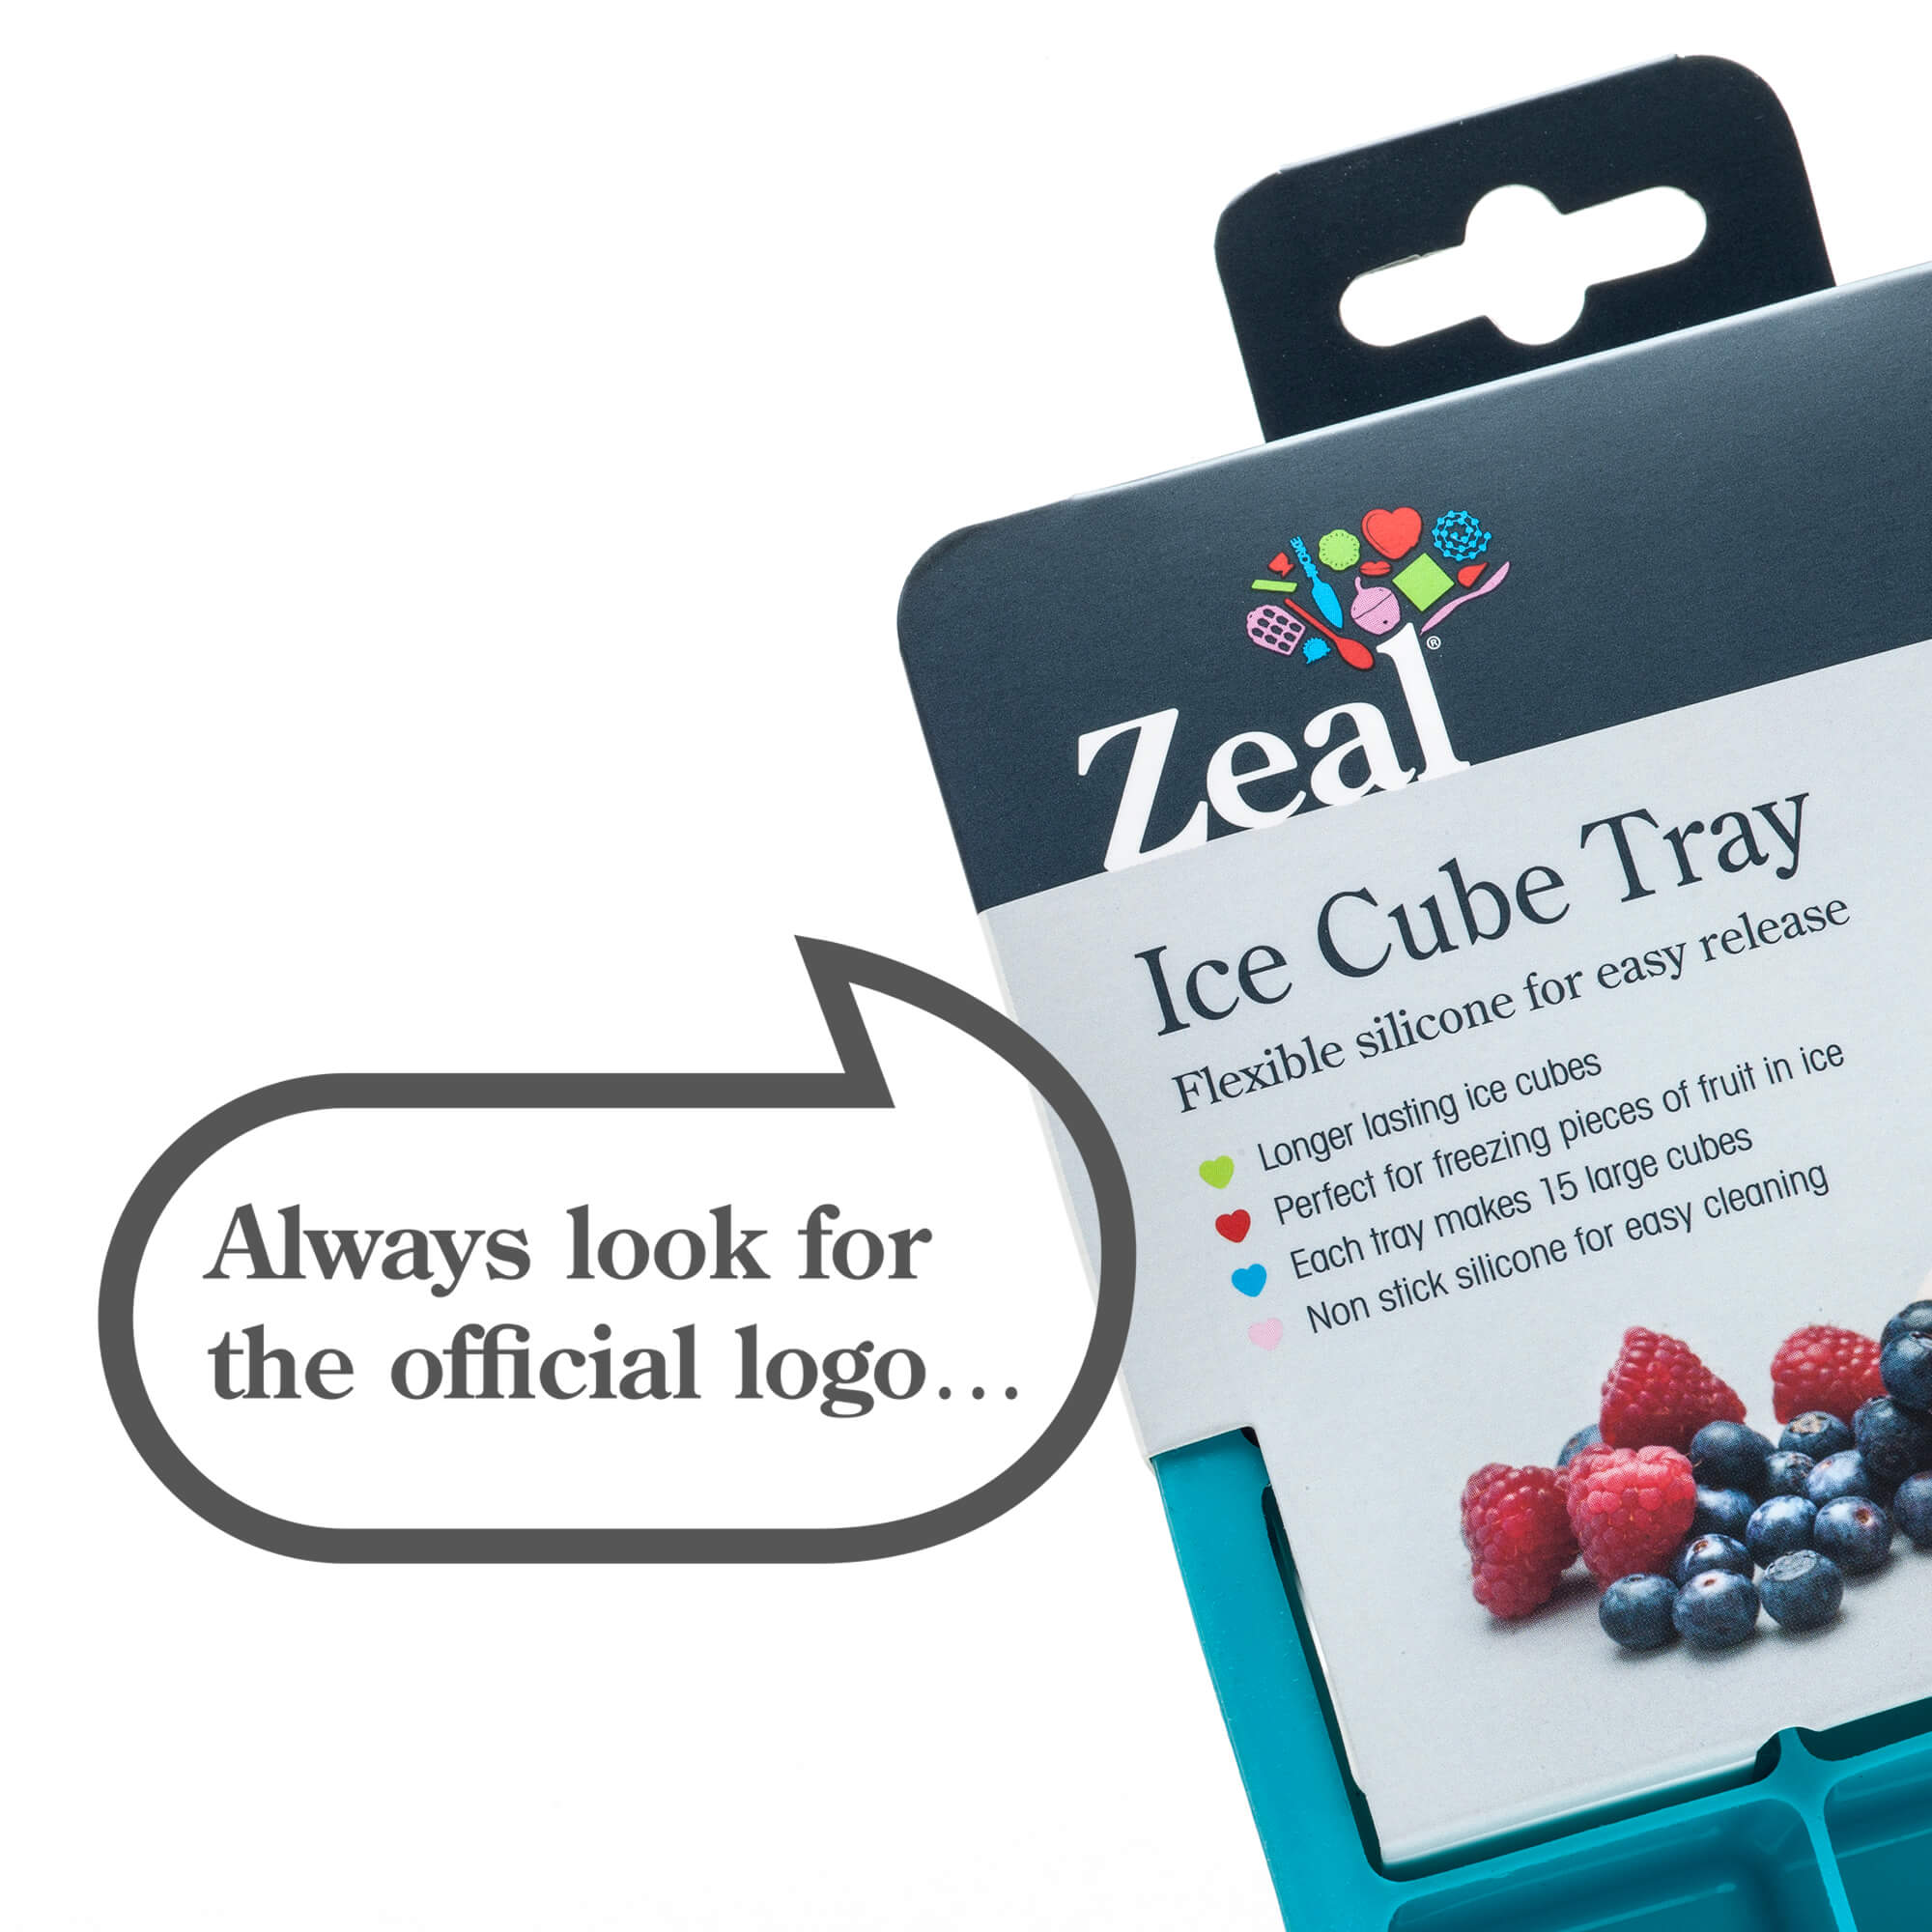 Zeal Extra Large Ice Cube Tray official logo